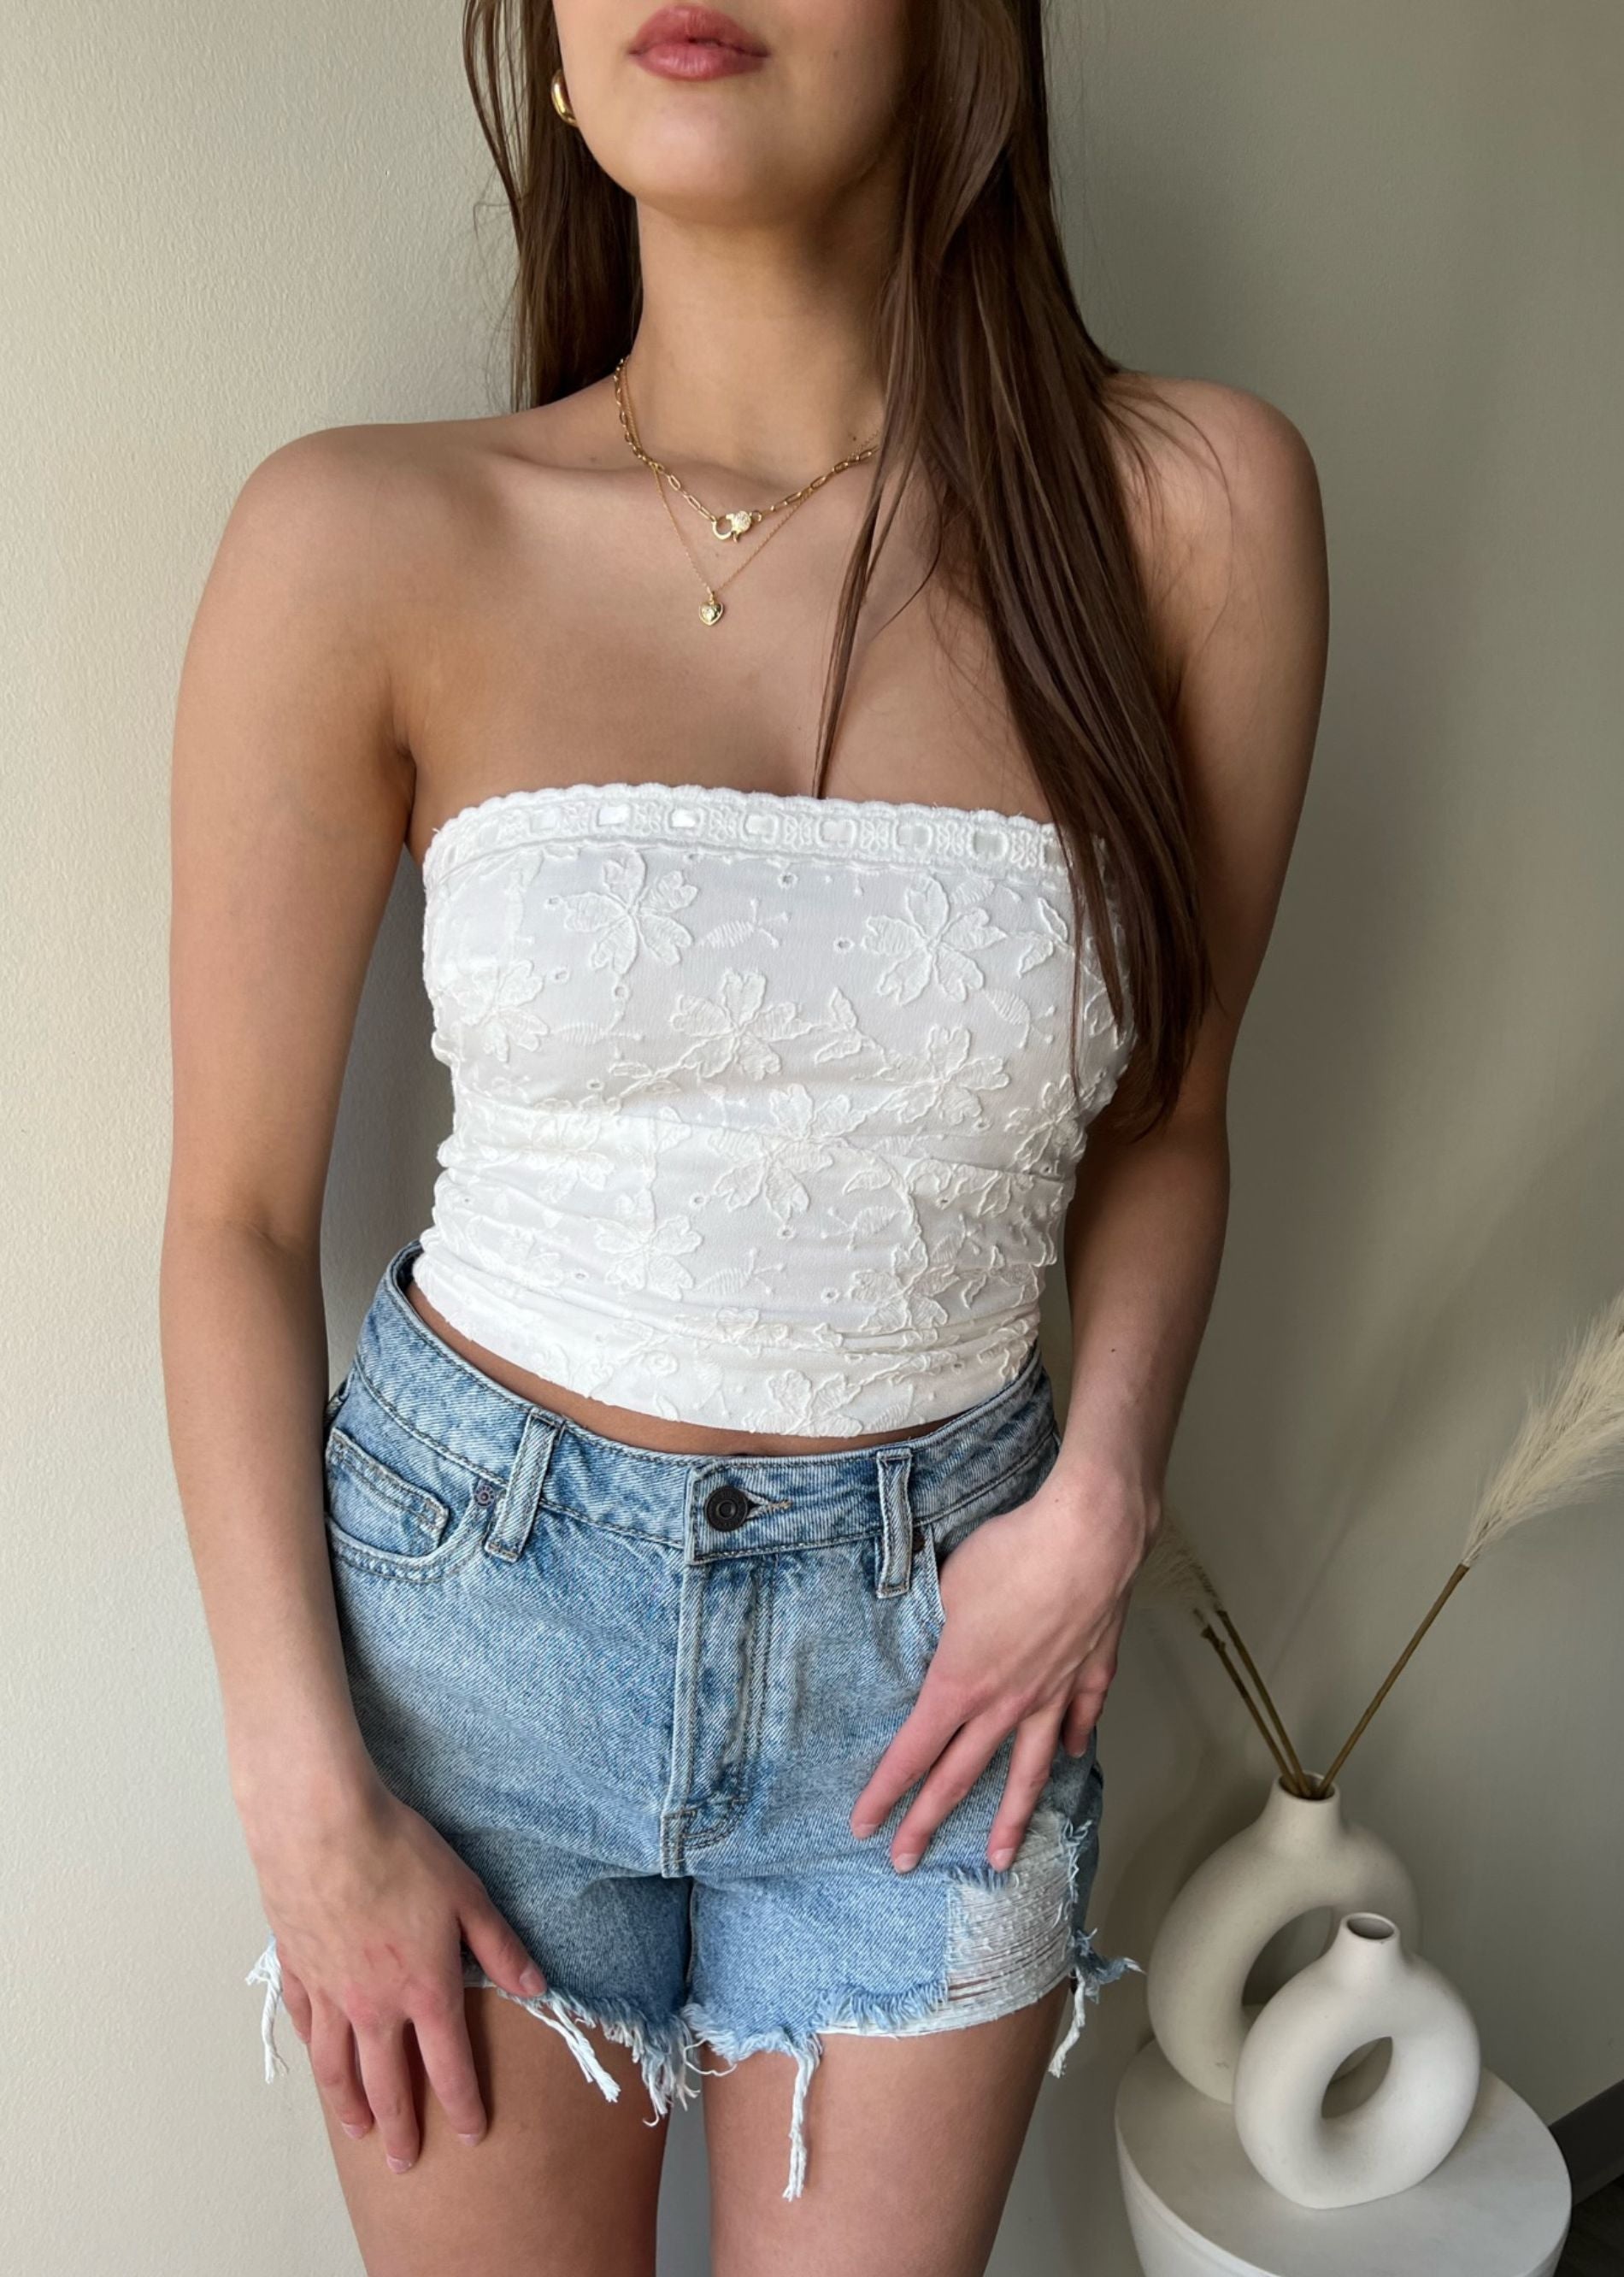 The Difference Tube Top ☆ Light Wash – Rock N Rags